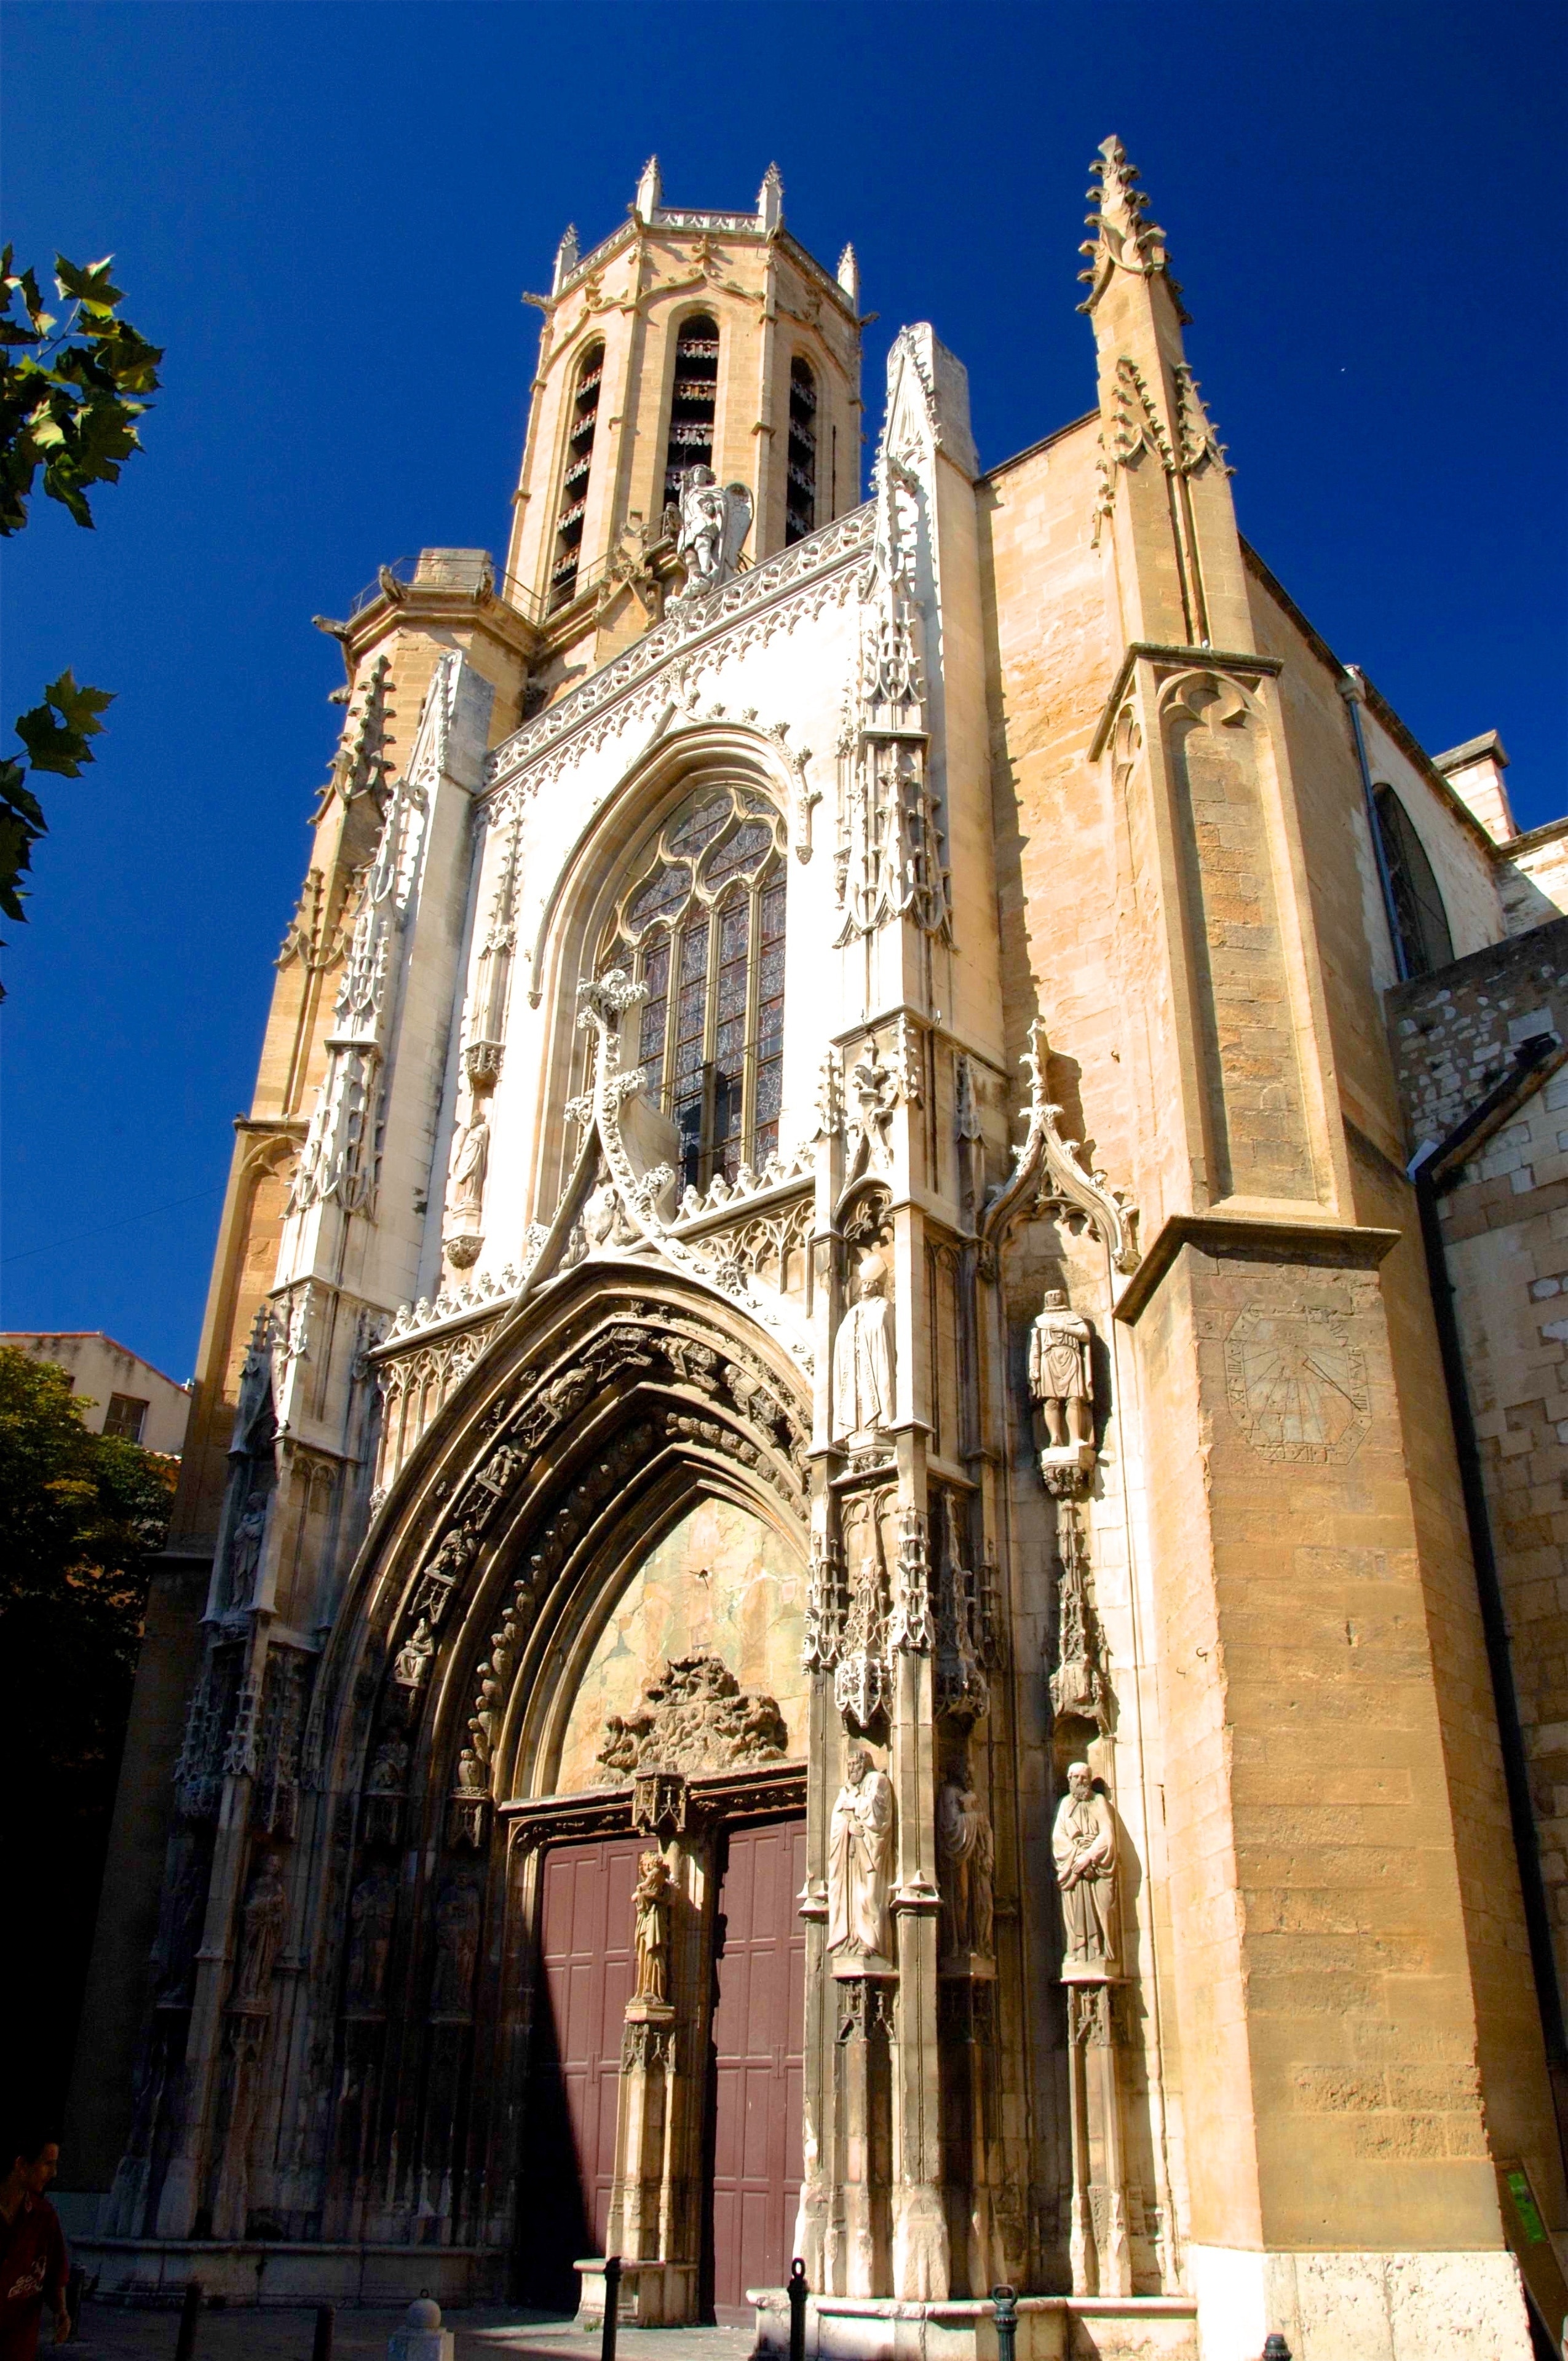 Gothic façade of the Saint Pierre Church in Avignon.  Located right in the center of town, a stone's throw from the Aubanel printing museum, the Place Saint Pierre, cobbled with shingle stones, is the church square for the parish church that bears the same name.

Saint-Pierre had been rebuilt in 1385, thanks to a donation from the Cardinal Pierre de Près. Unfortunately we cannot enter and admire the panelling, the altarpiece, the pulpit or the paintings, one of which is the "Adoration of the Shepherds" by Simon de Chalons. But its façade, in flamboyant Provençal Gothic, is the most embellished of all of Avignon's churches and its doors alone merit a look.